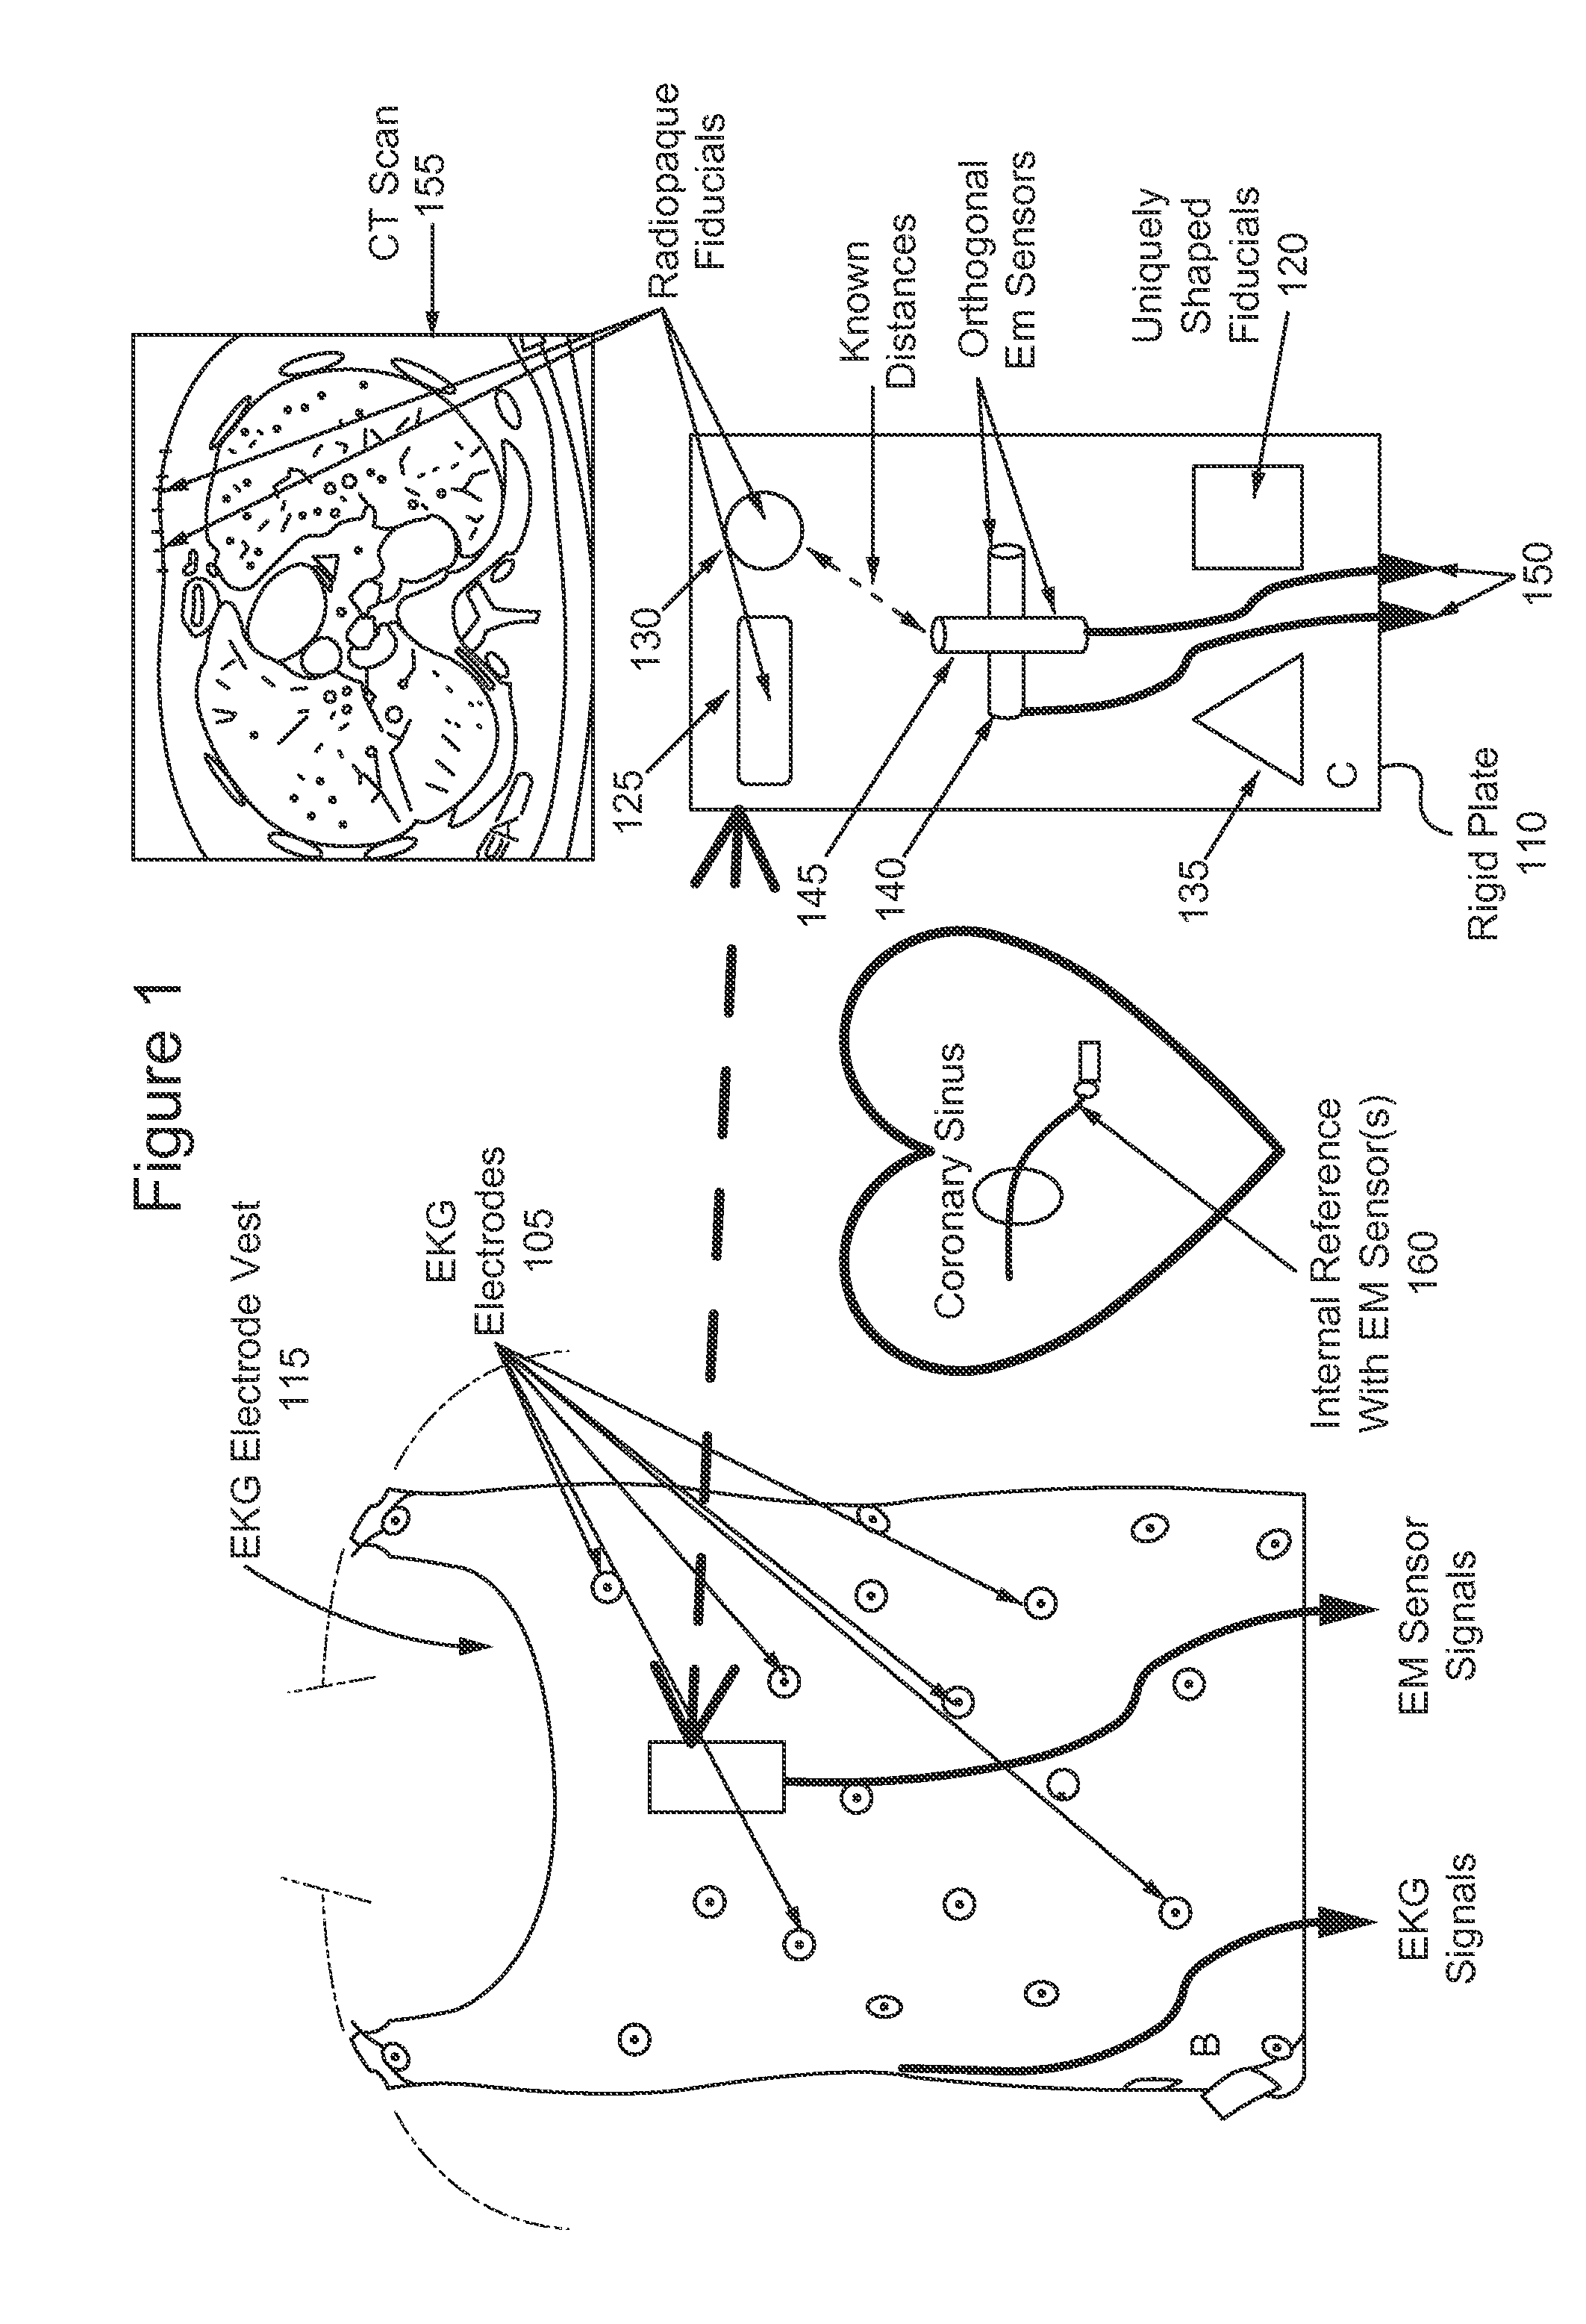 System and methods for using body surface cardiac electrogram information combined with internal information to deliver therapy